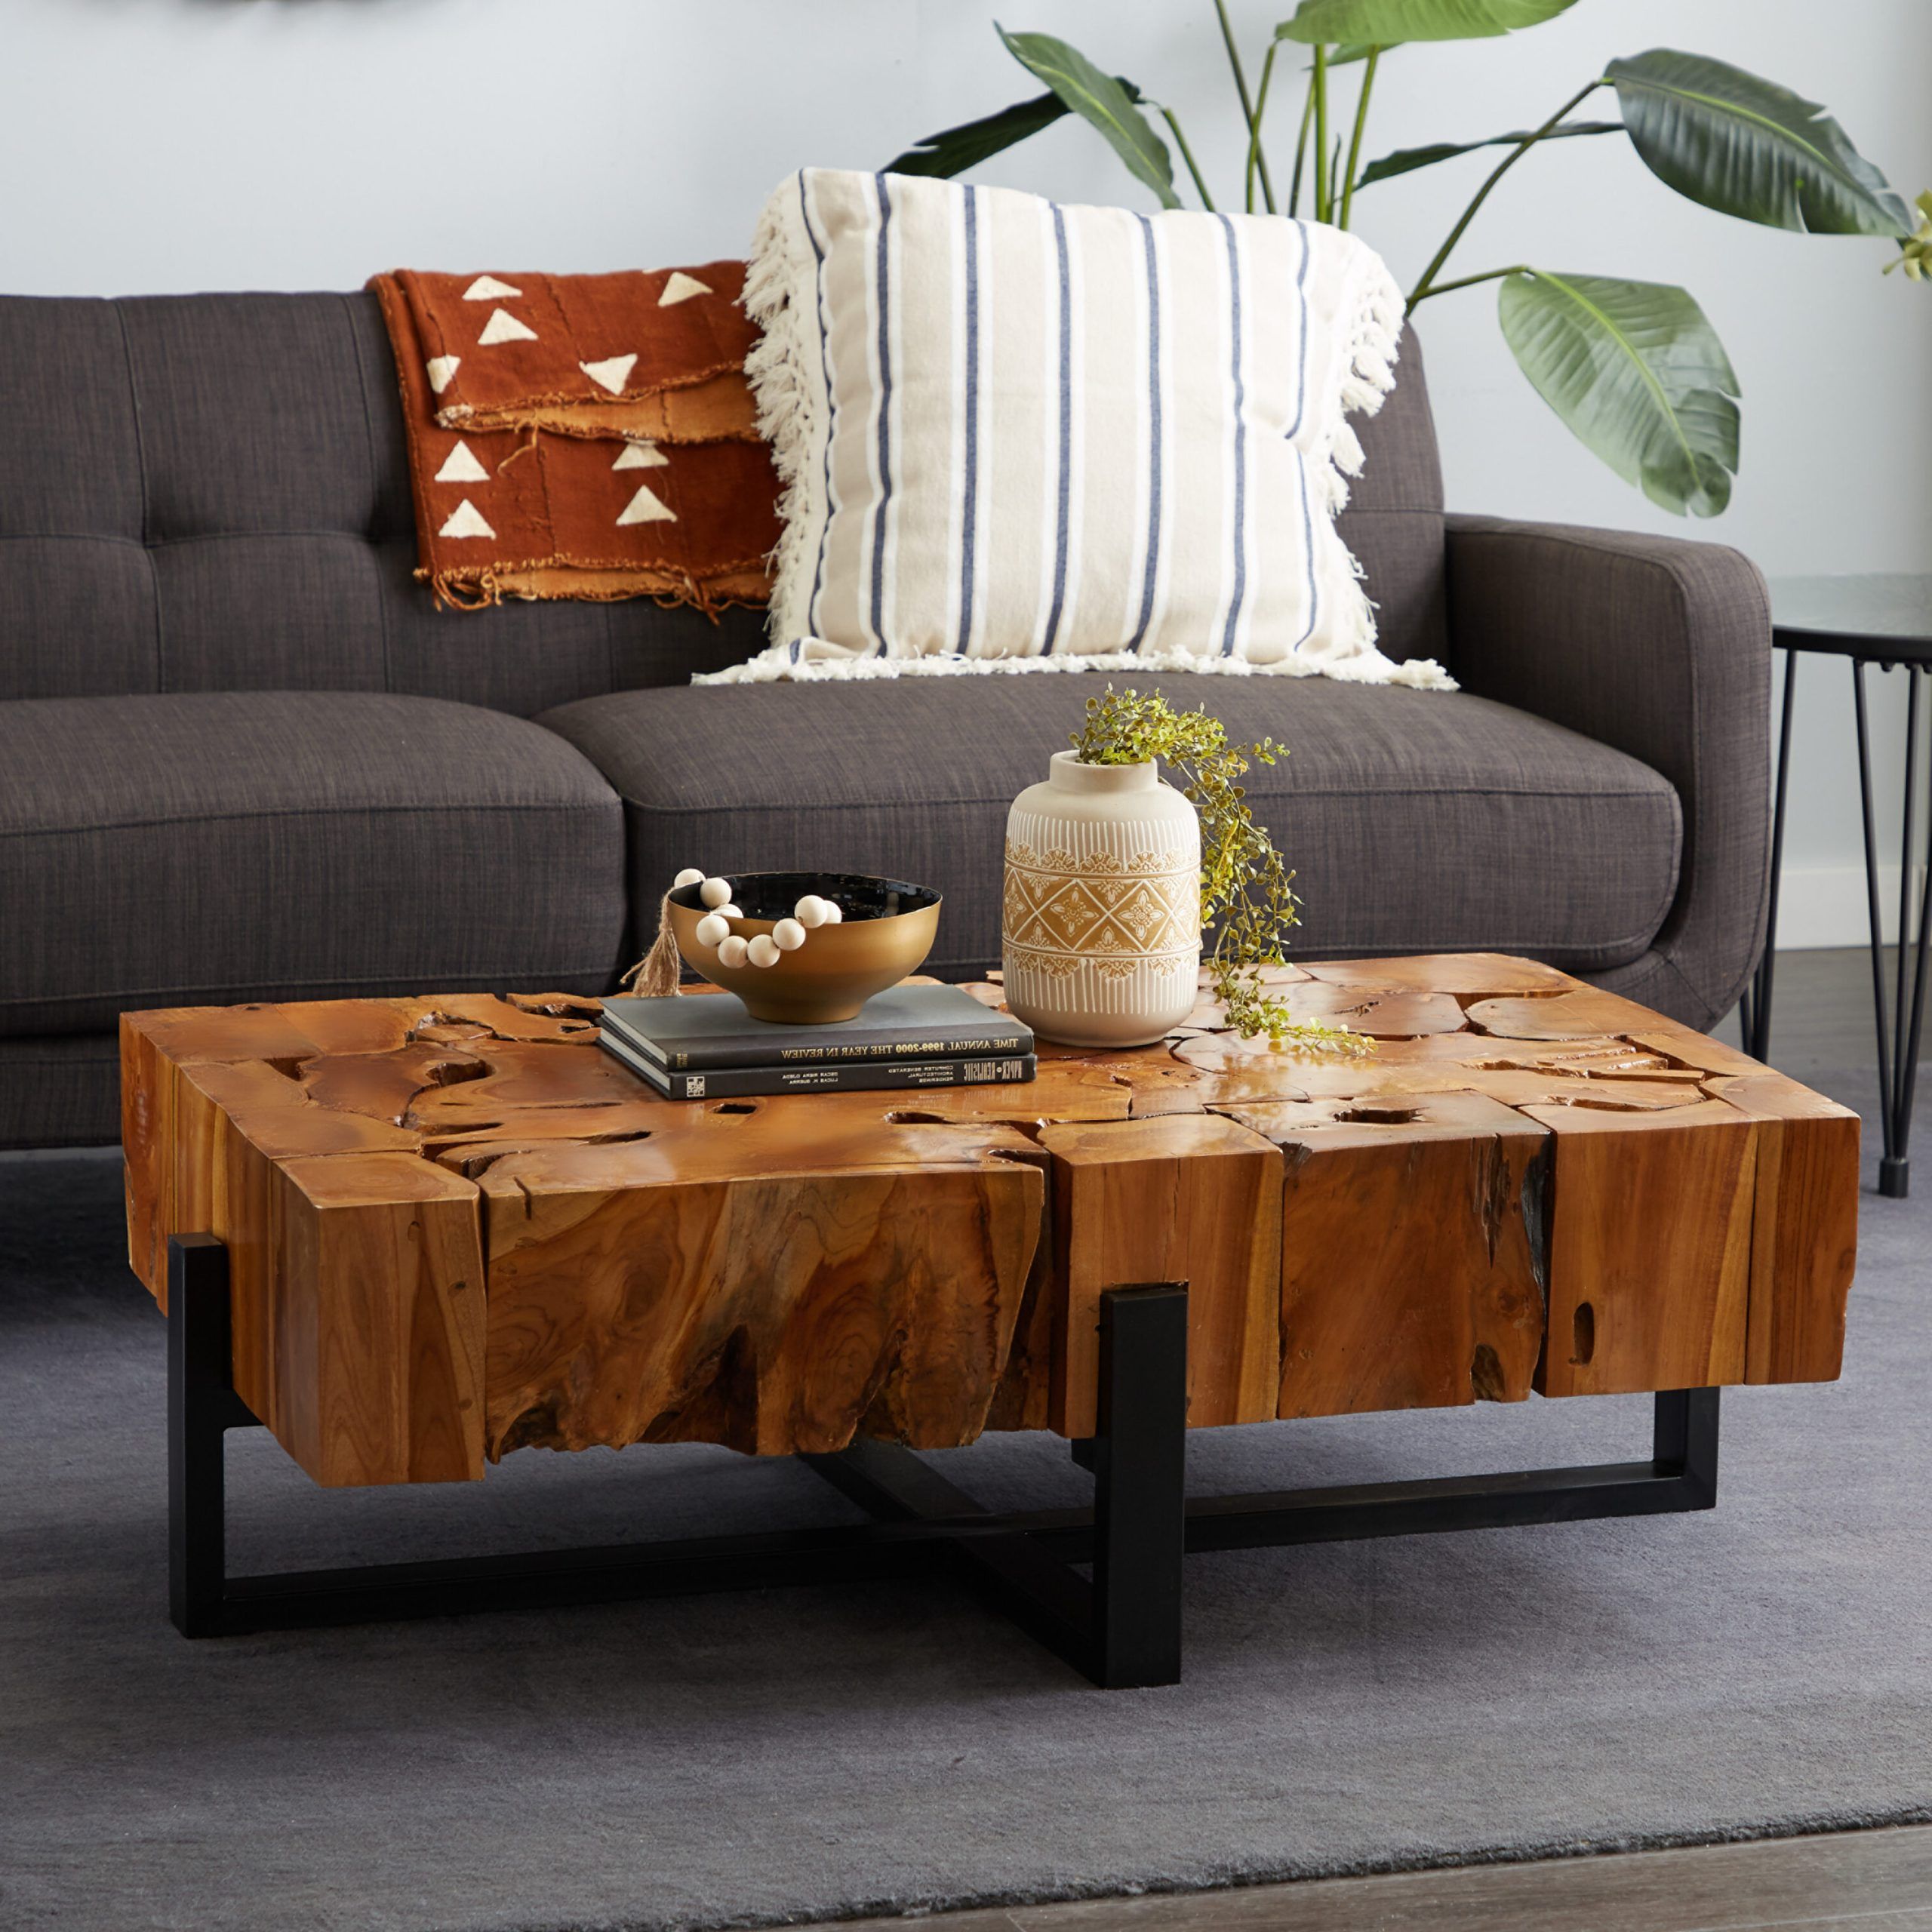 Best And Newest Grayson Lane Teak Wood Rustic Coffee Table In The Coffee Tables Department  At Lowes Regarding Rustic Coffee Tables (View 2 of 10)